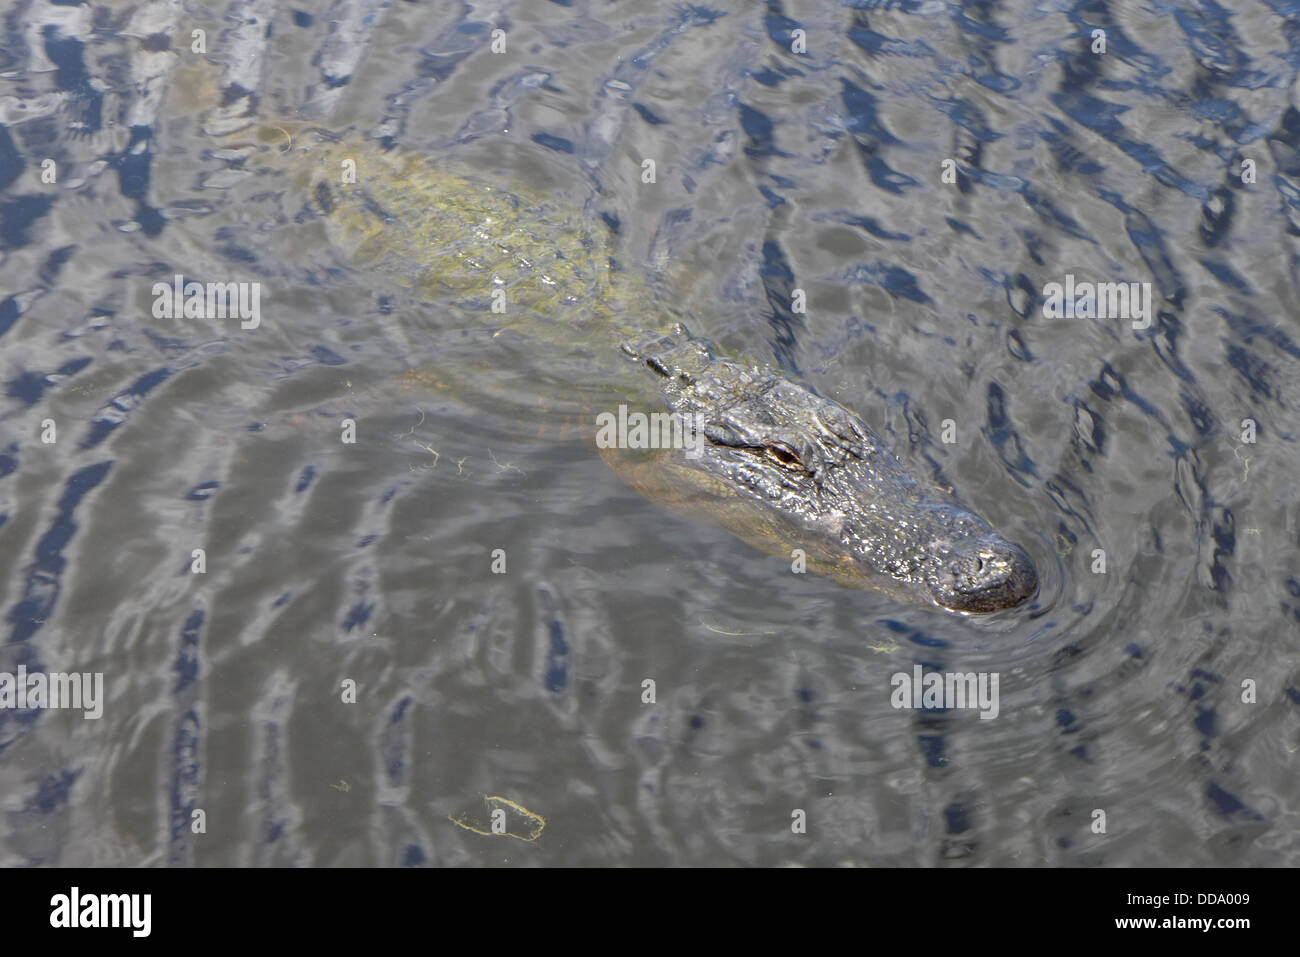 An alligator swimming in Shell Lake on the Dupuis Water Management Area in Canal Point South Florida USA Stock Photo